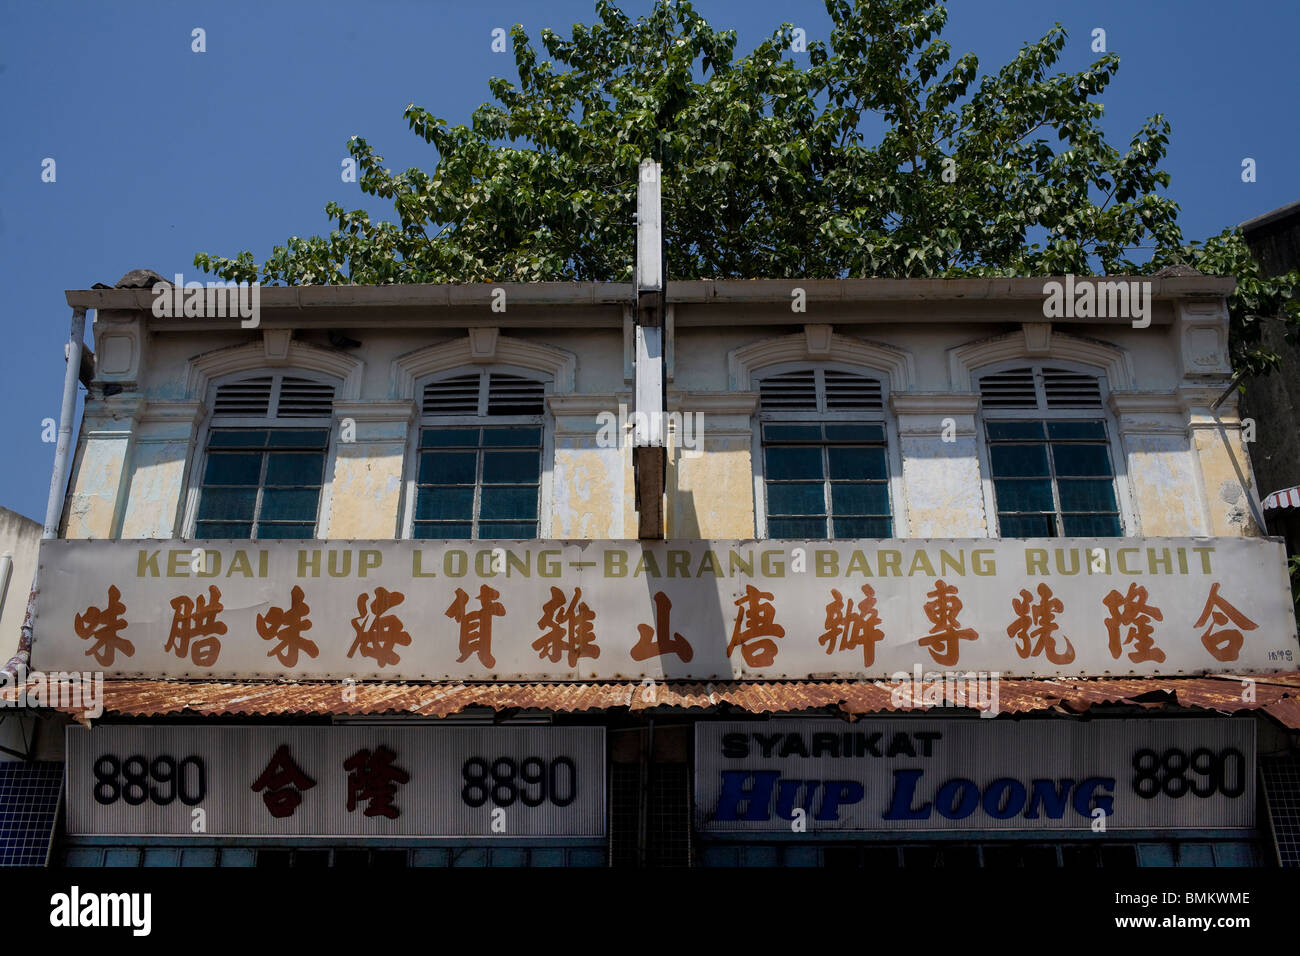 Traditional shops and their mandarin billboards in the old chinese quarter of Penang, Malaysia. Stock Photo